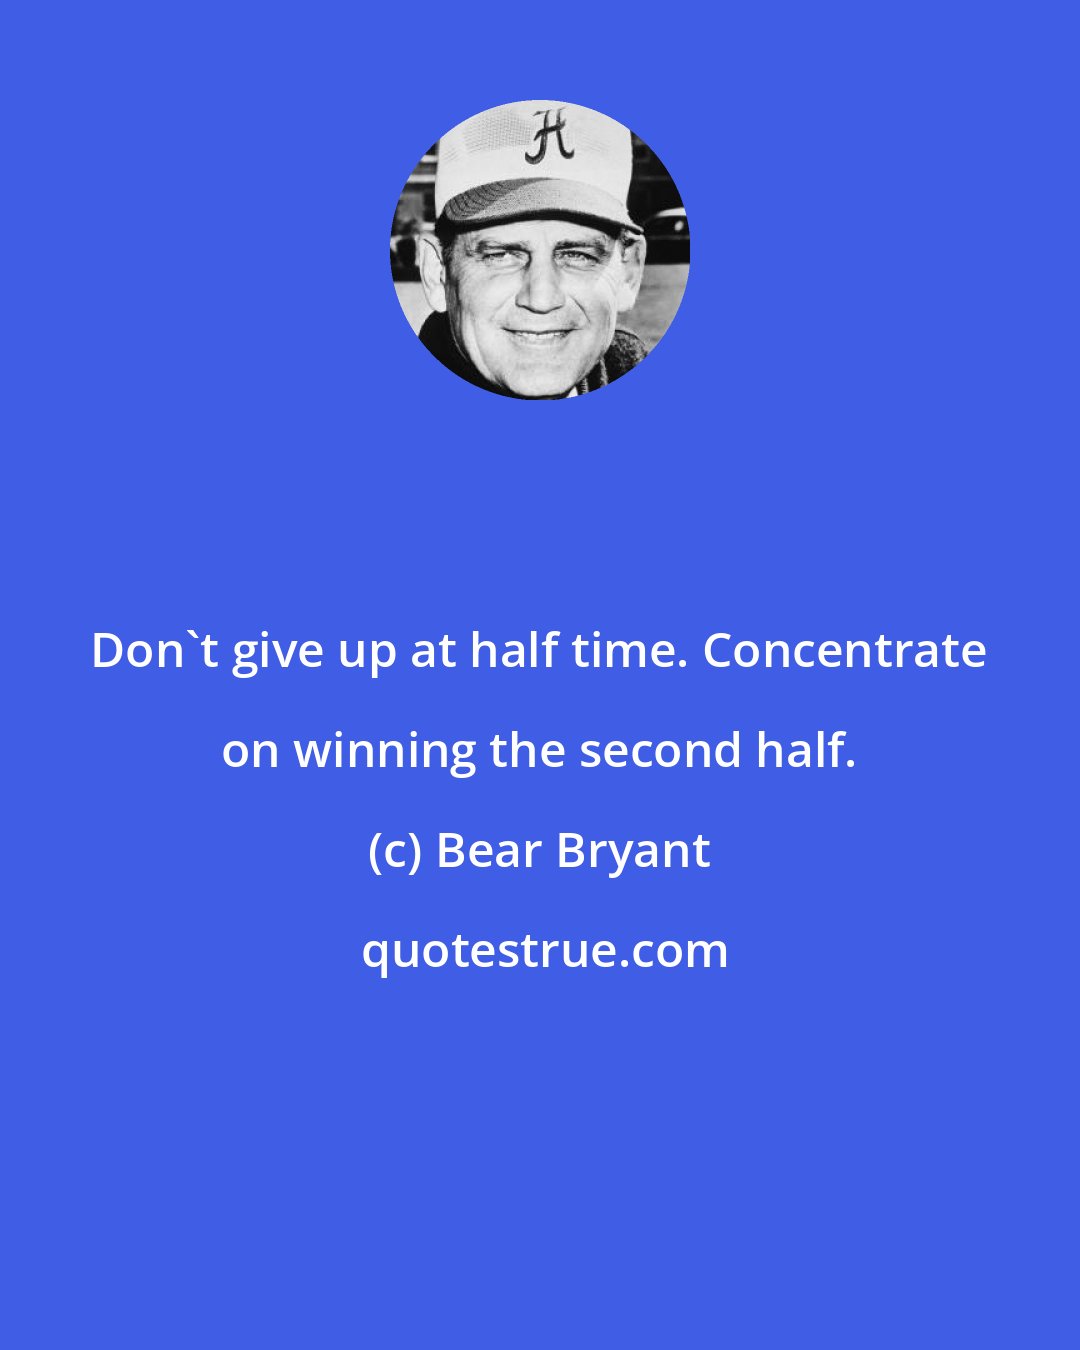 Bear Bryant: Don't give up at half time. Concentrate on winning the second half.